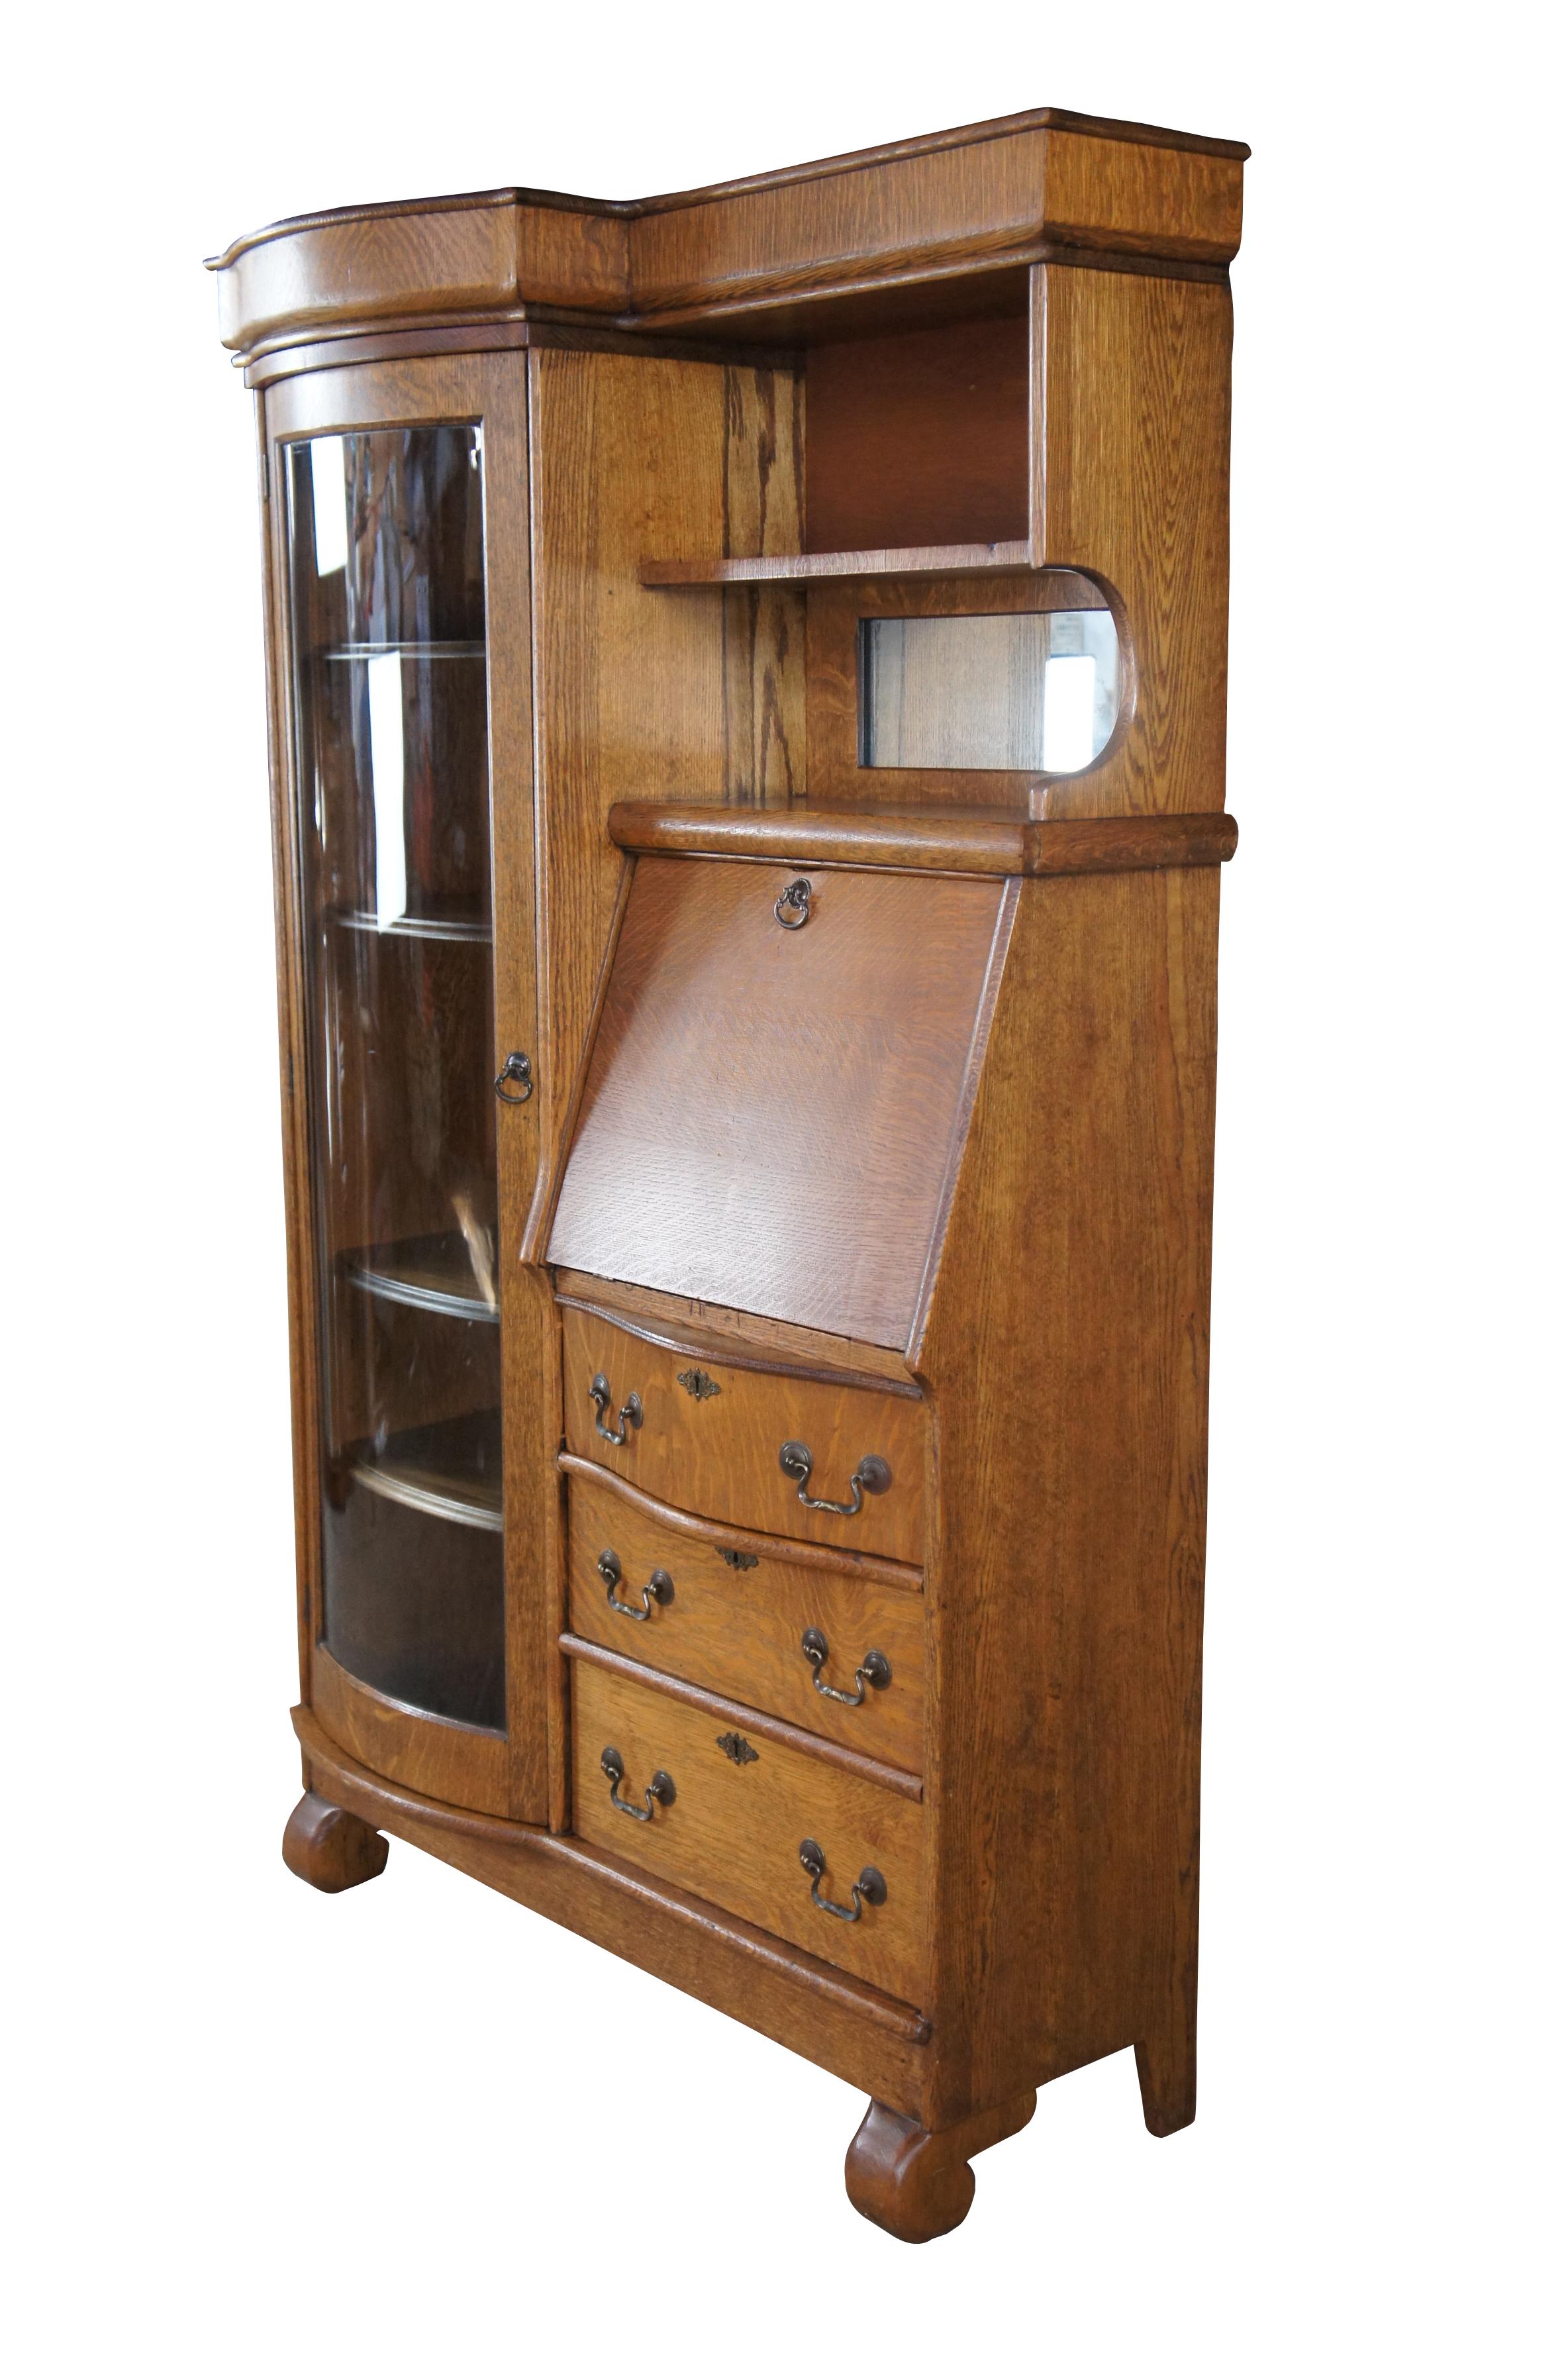 An impressive antique Victorian side by side secretary desk and curio bookcase, circa 1900s. Made of quartersawn or 